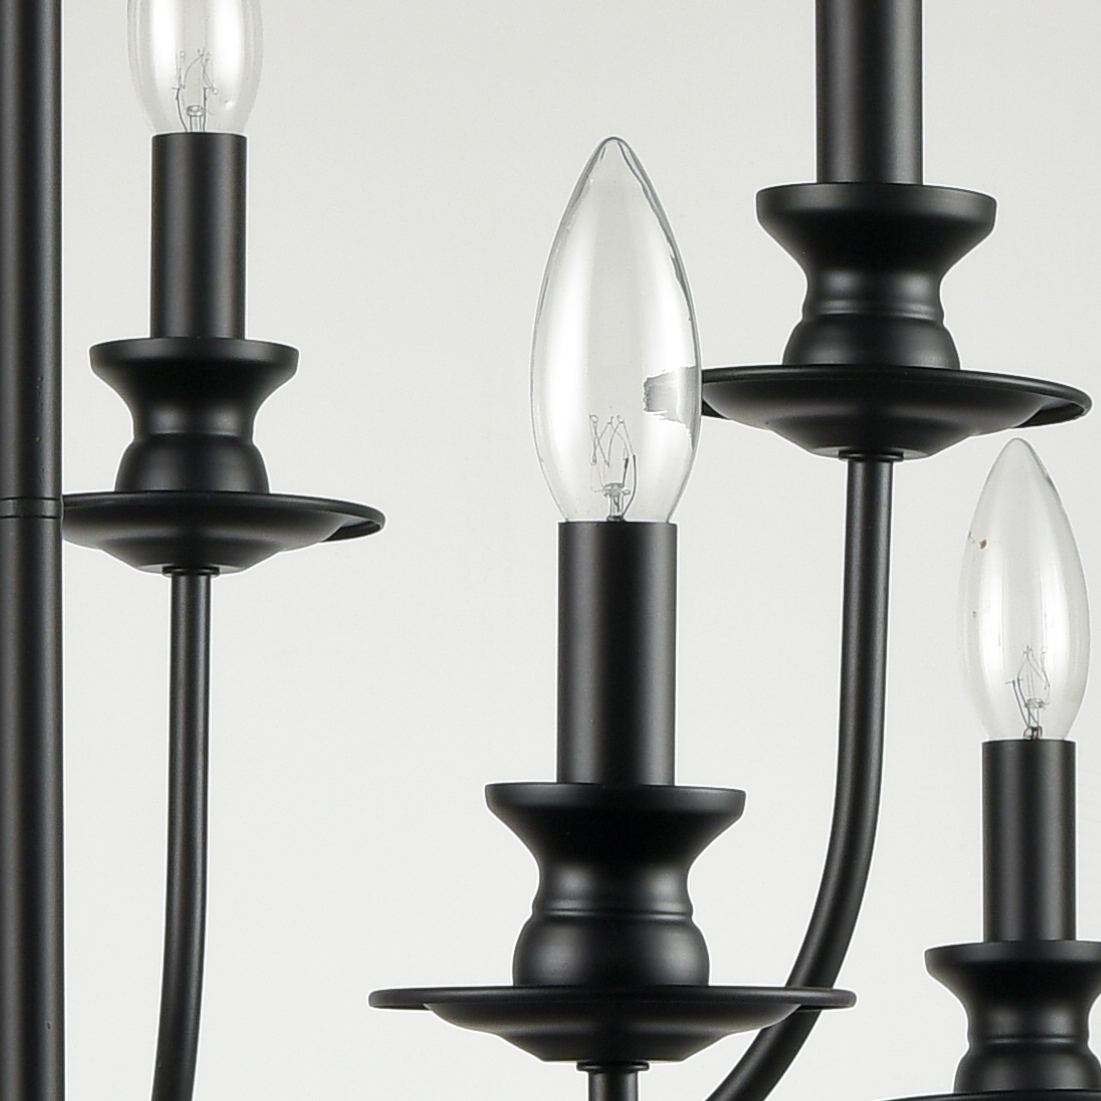 Farmhouse Chandelier Black Candle Chandelier for Dining